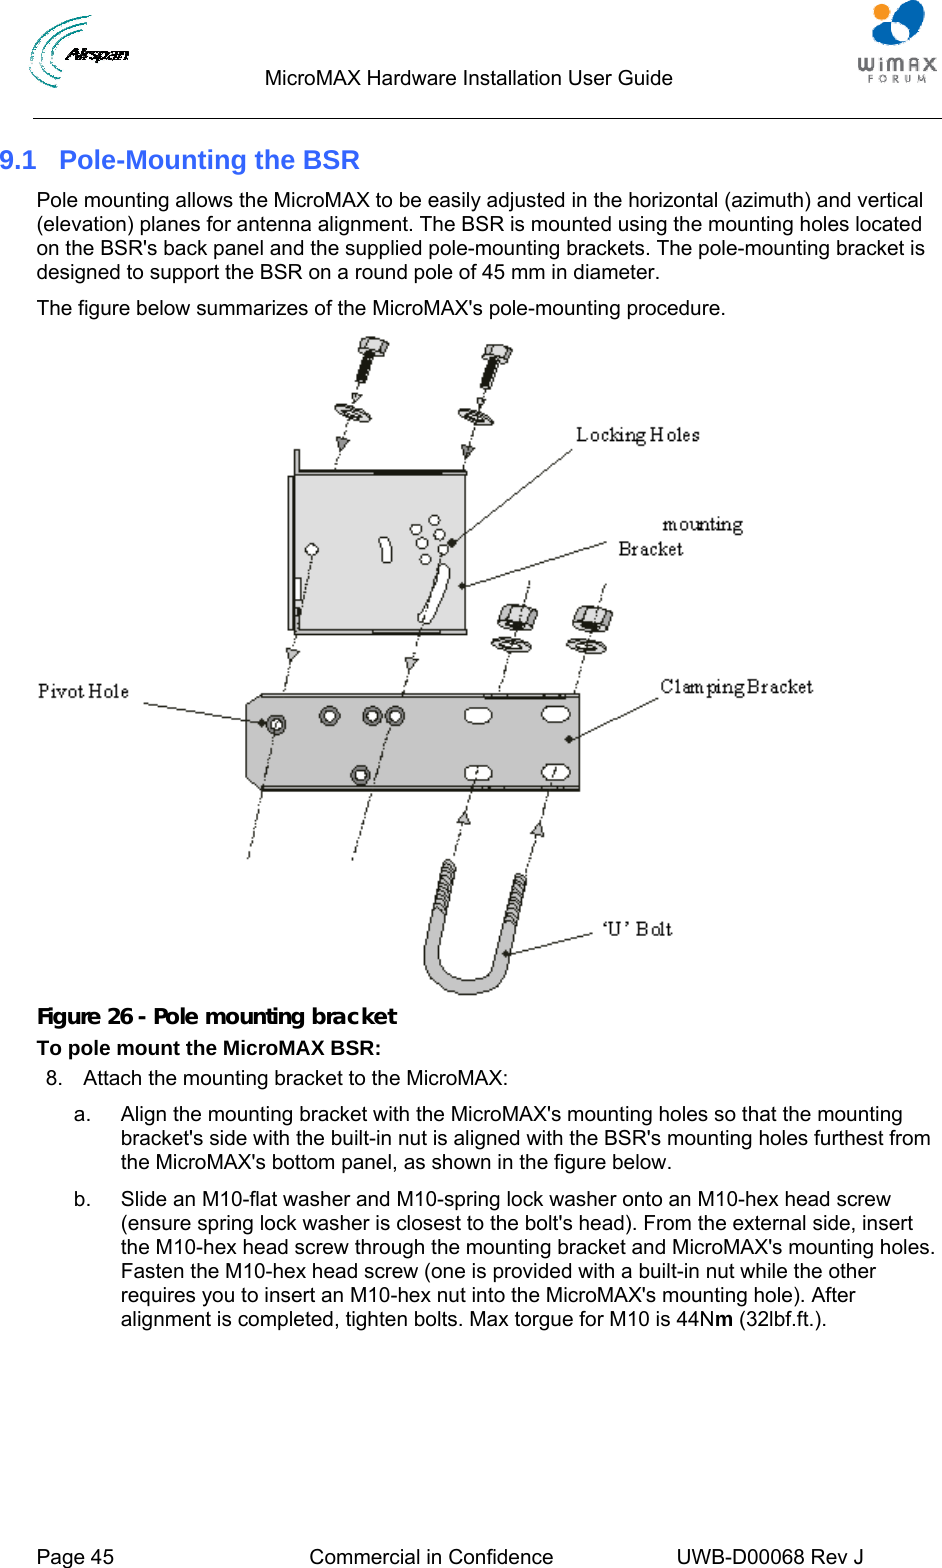                                  MicroMAX Hardware Installation User Guide     Page 45  Commercial in Confidence  UWB-D00068 Rev J   9.1  Pole-Mounting the BSR Pole mounting allows the MicroMAX to be easily adjusted in the horizontal (azimuth) and vertical (elevation) planes for antenna alignment. The BSR is mounted using the mounting holes located on the BSR&apos;s back panel and the supplied pole-mounting brackets. The pole-mounting bracket is designed to support the BSR on a round pole of 45 mm in diameter. The figure below summarizes of the MicroMAX&apos;s pole-mounting procedure.  Figure 26 - Pole mounting bracket To pole mount the MicroMAX BSR: 8.  Attach the mounting bracket to the MicroMAX: a.  Align the mounting bracket with the MicroMAX&apos;s mounting holes so that the mounting bracket&apos;s side with the built-in nut is aligned with the BSR&apos;s mounting holes furthest from the MicroMAX&apos;s bottom panel, as shown in the figure below. b.  Slide an M10-flat washer and M10-spring lock washer onto an M10-hex head screw (ensure spring lock washer is closest to the bolt&apos;s head). From the external side, insert the M10-hex head screw through the mounting bracket and MicroMAX&apos;s mounting holes. Fasten the M10-hex head screw (one is provided with a built-in nut while the other requires you to insert an M10-hex nut into the MicroMAX&apos;s mounting hole). After alignment is completed, tighten bolts. Max torgue for M10 is 44Nm (32lbf.ft.). 